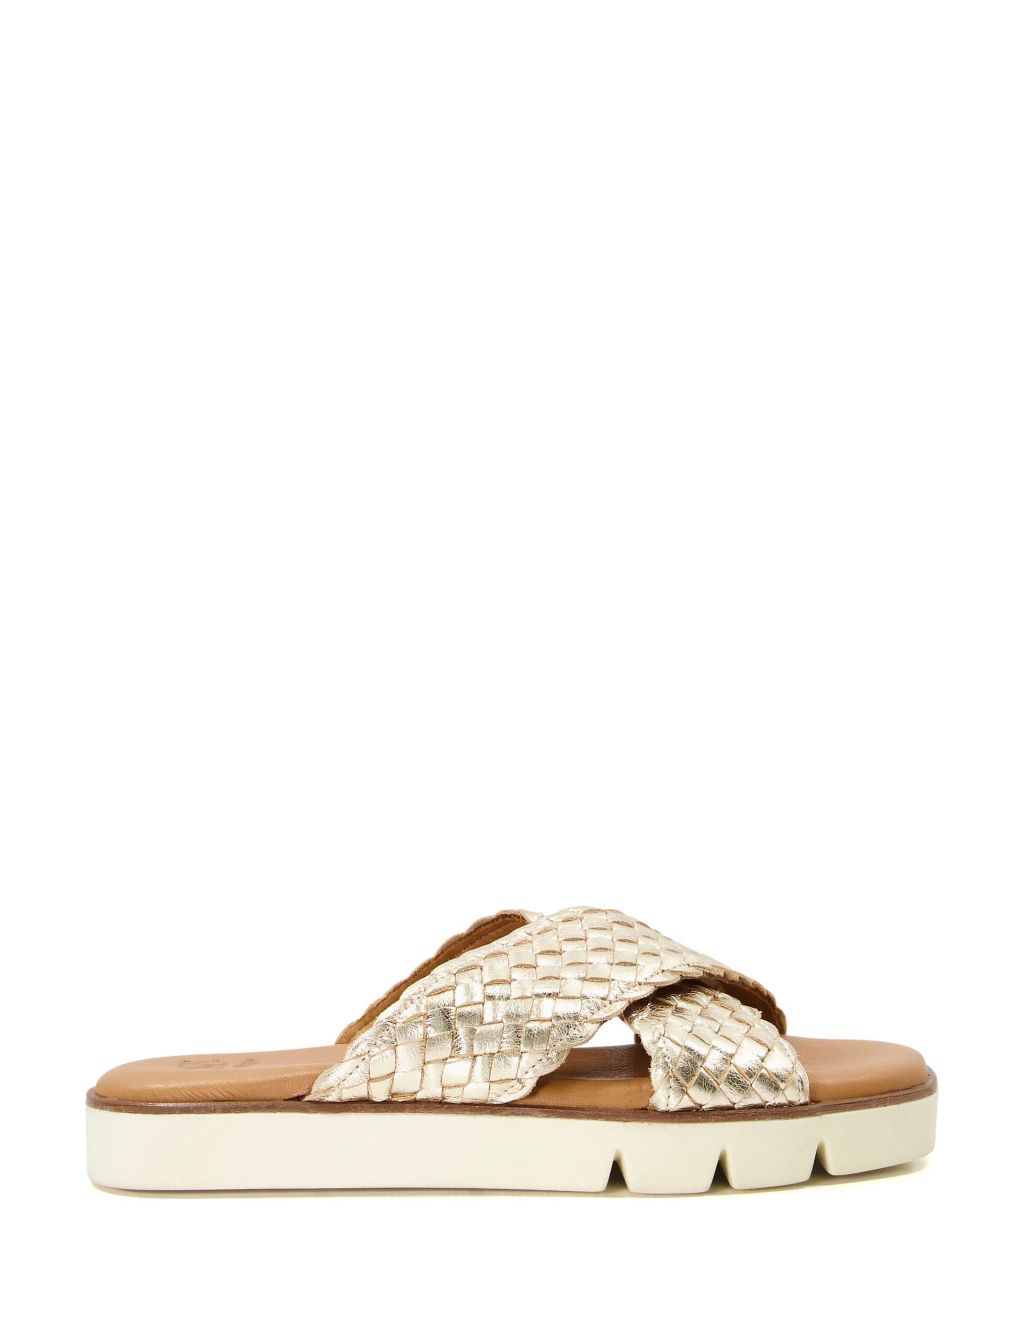 Leather Woven Crossover Flat Sliders image 1